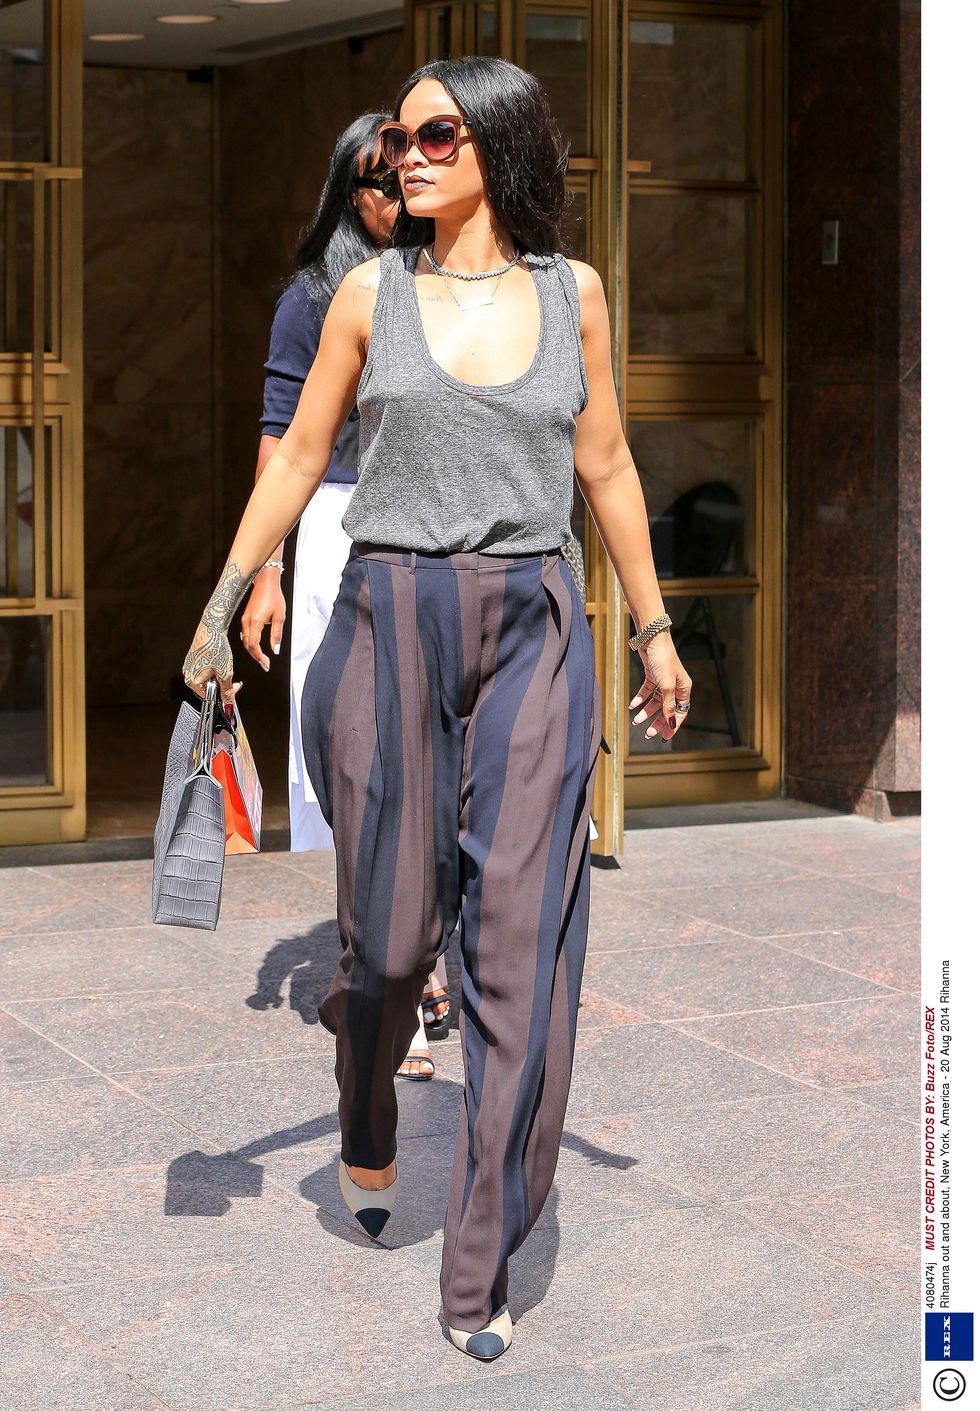 Rihanna rocks the Normcore trend and nails it